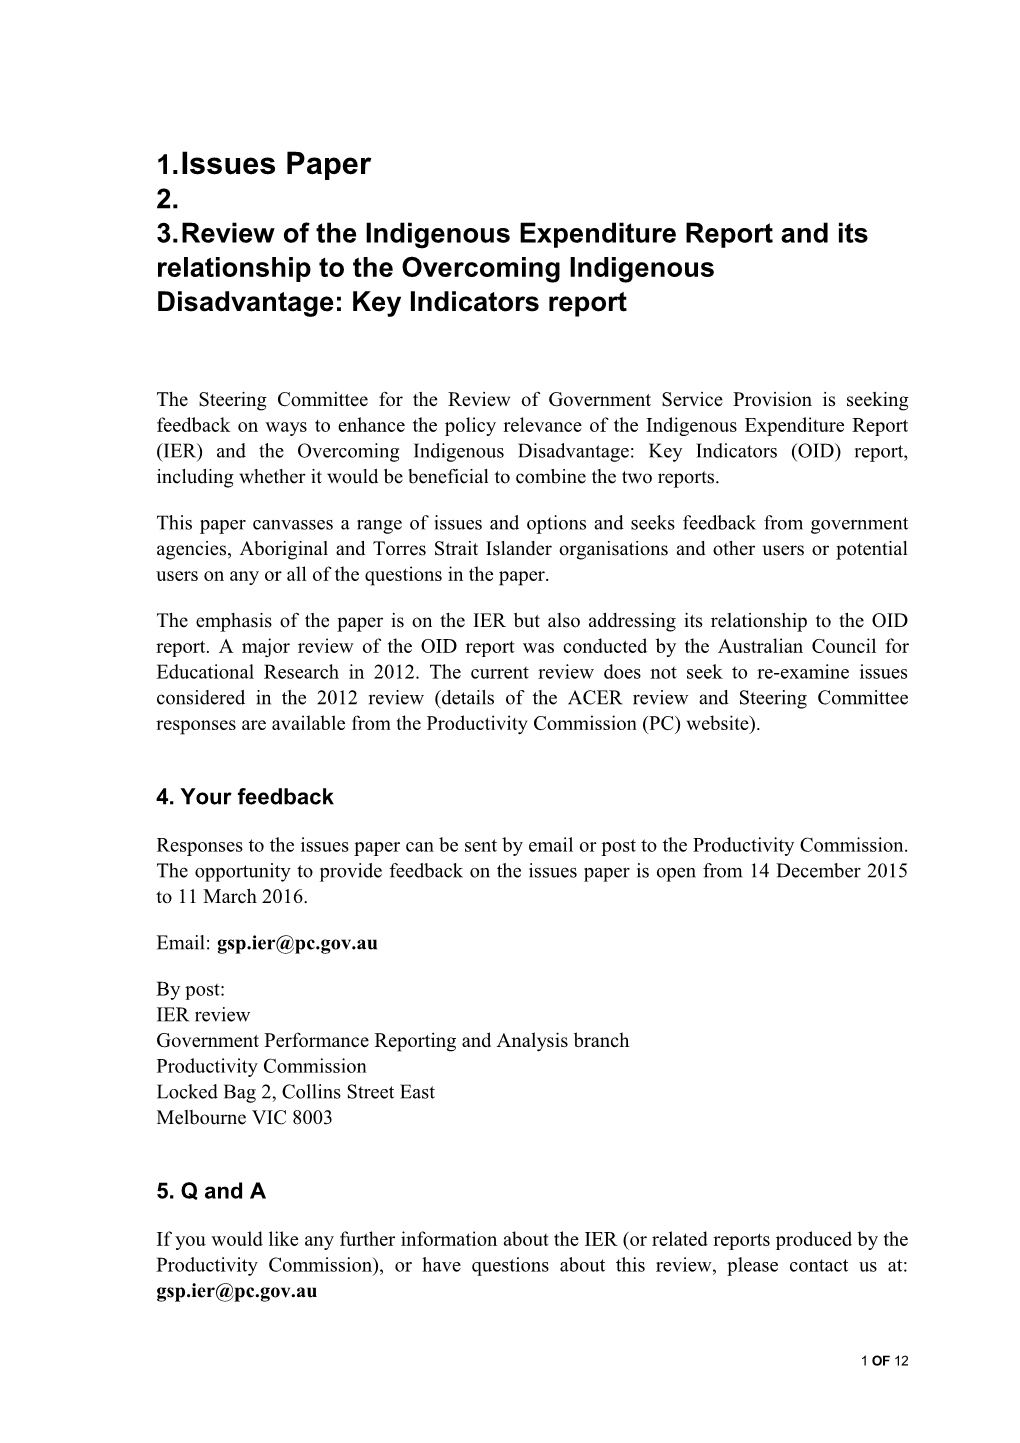 Review of the Indigenous Expenditure Report - Issues Paper